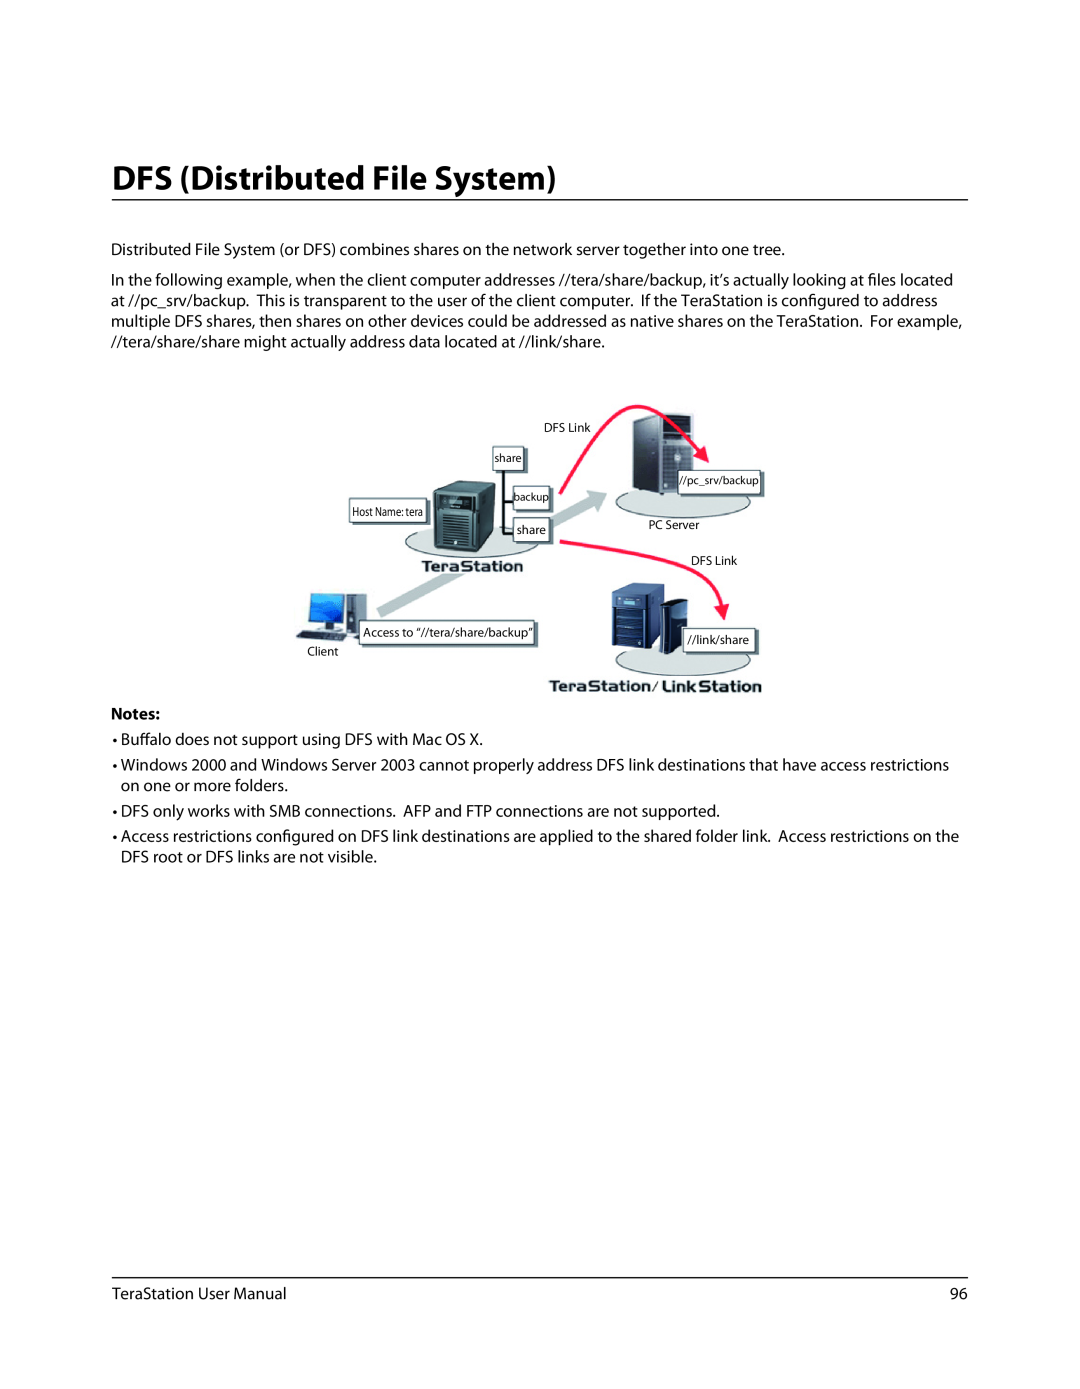 Buffalo Technology TS-RXL, TSXE80TLR5 user manual DFS Distributed File System, share pcsrv/backup backup, link/share 